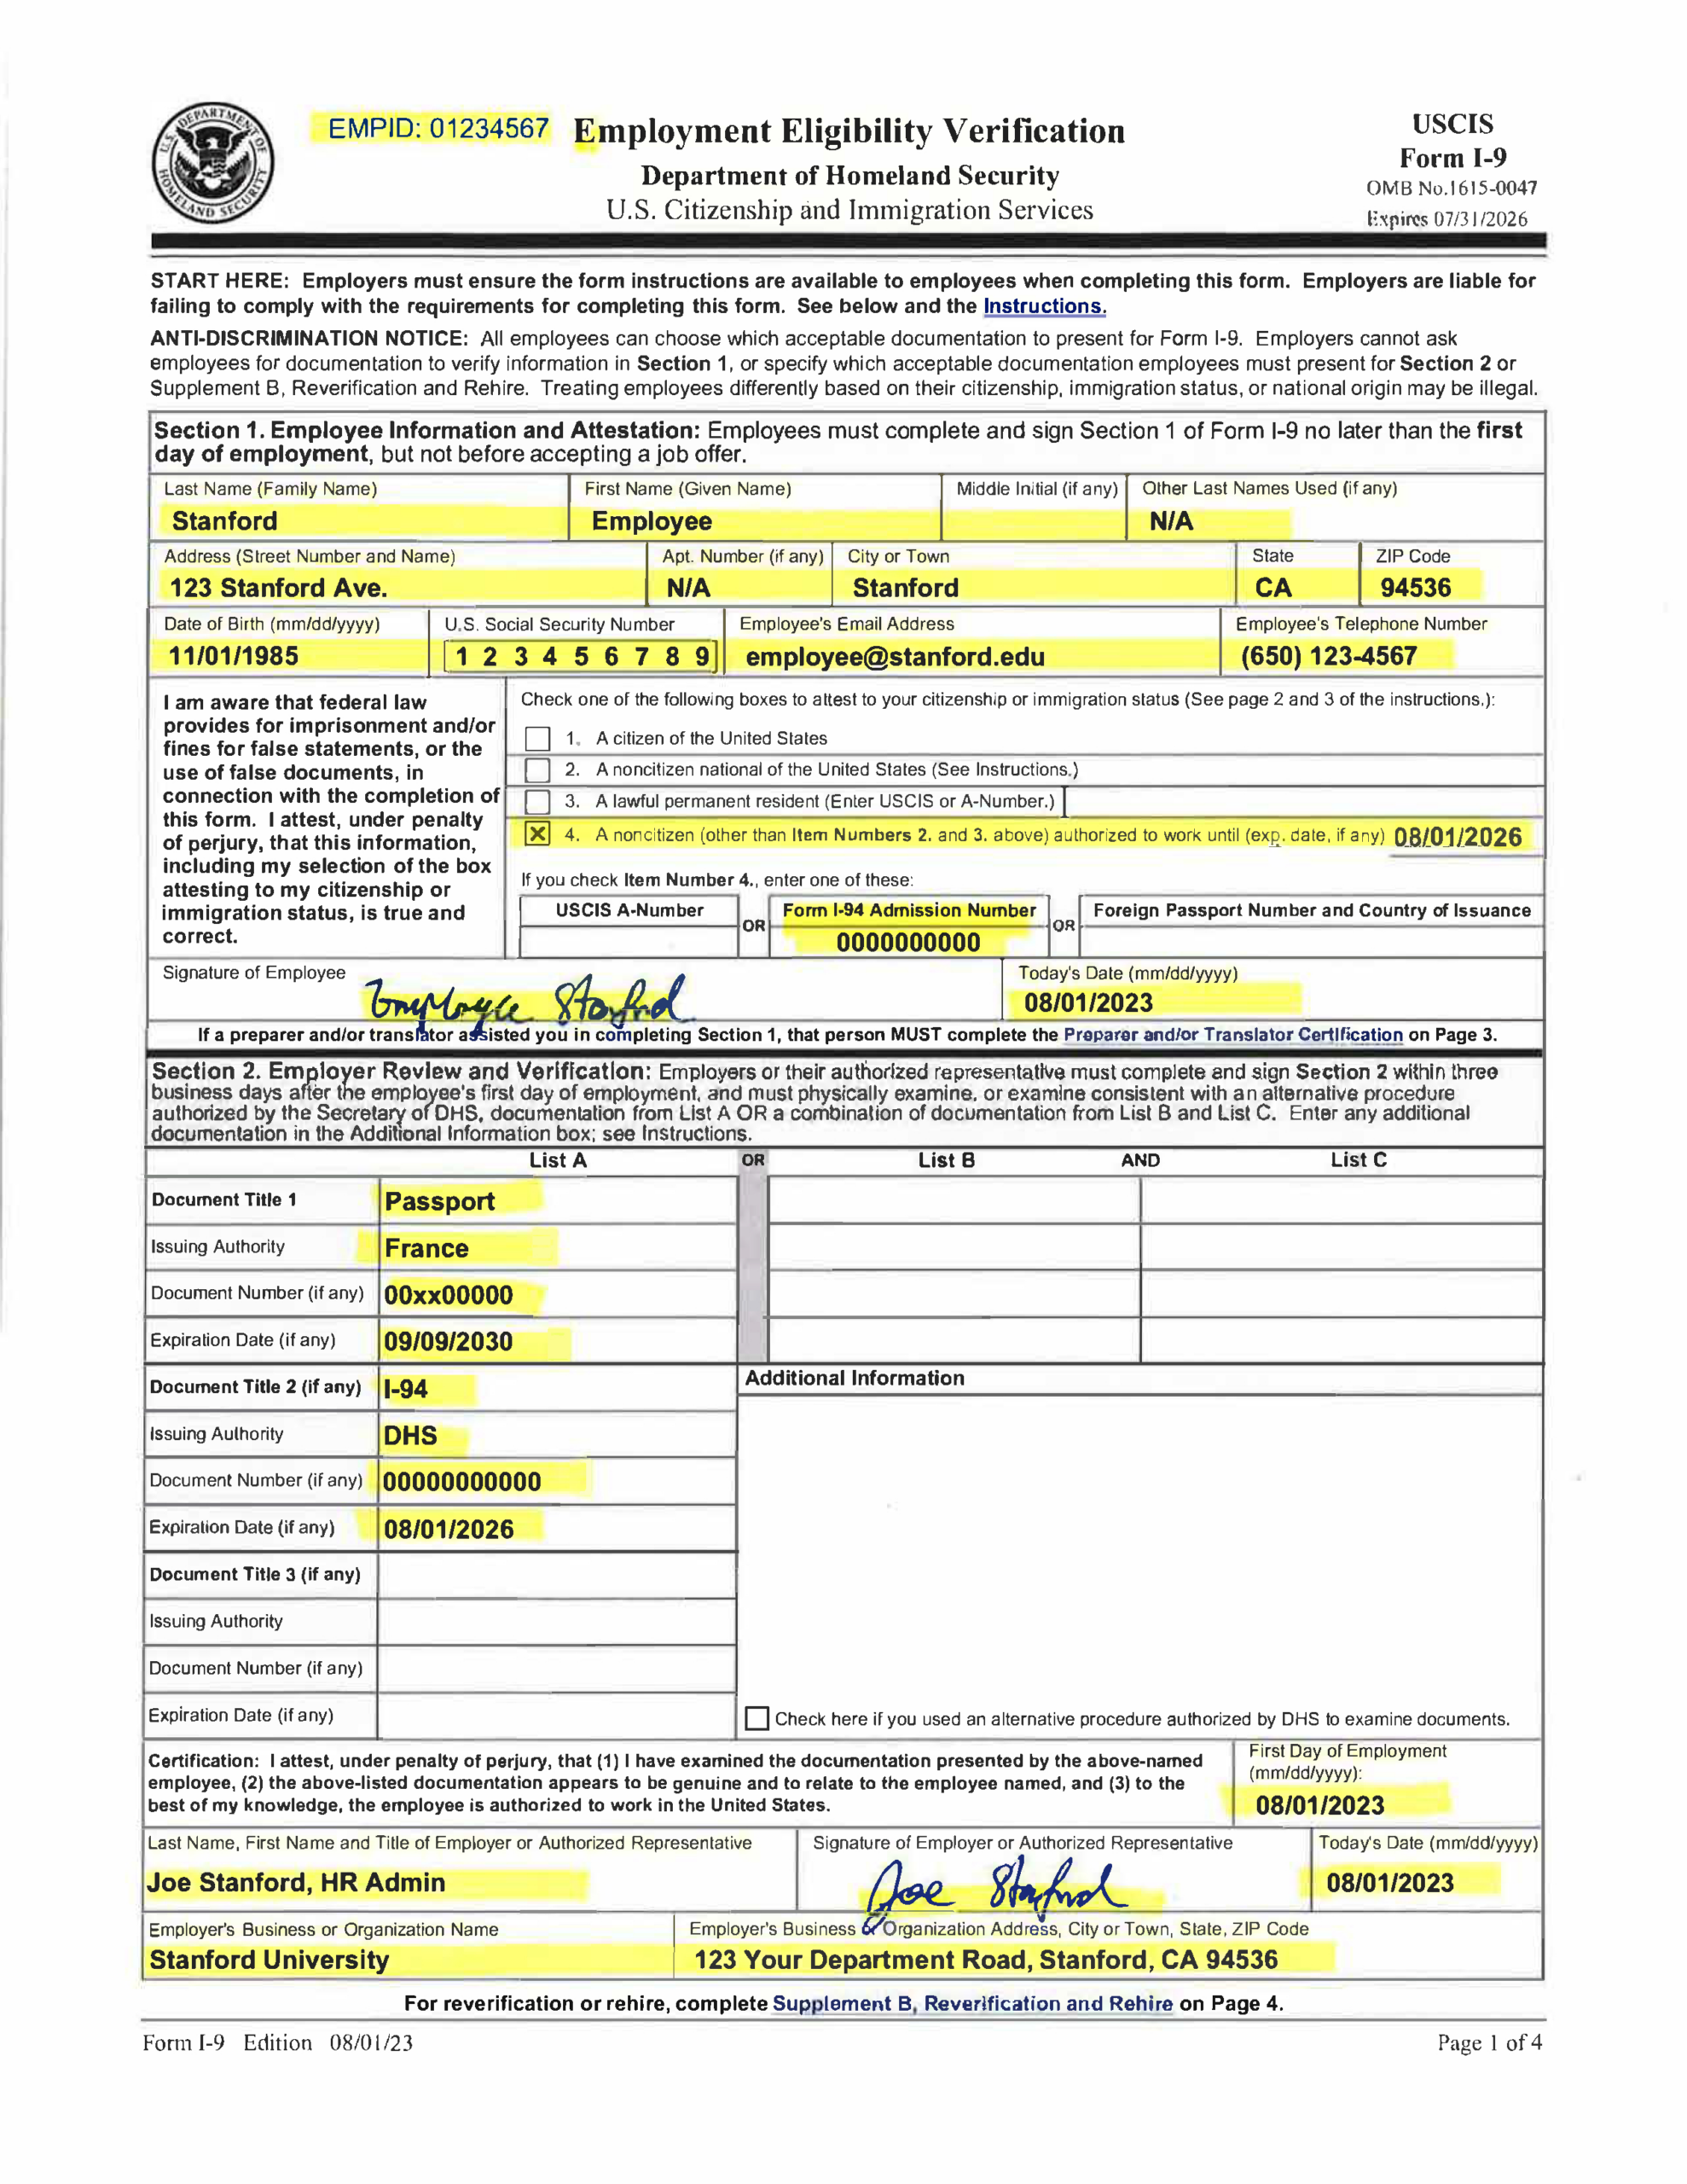 Examples Of Completed Form I-9 For Stanford regarding Federal I-9 Form